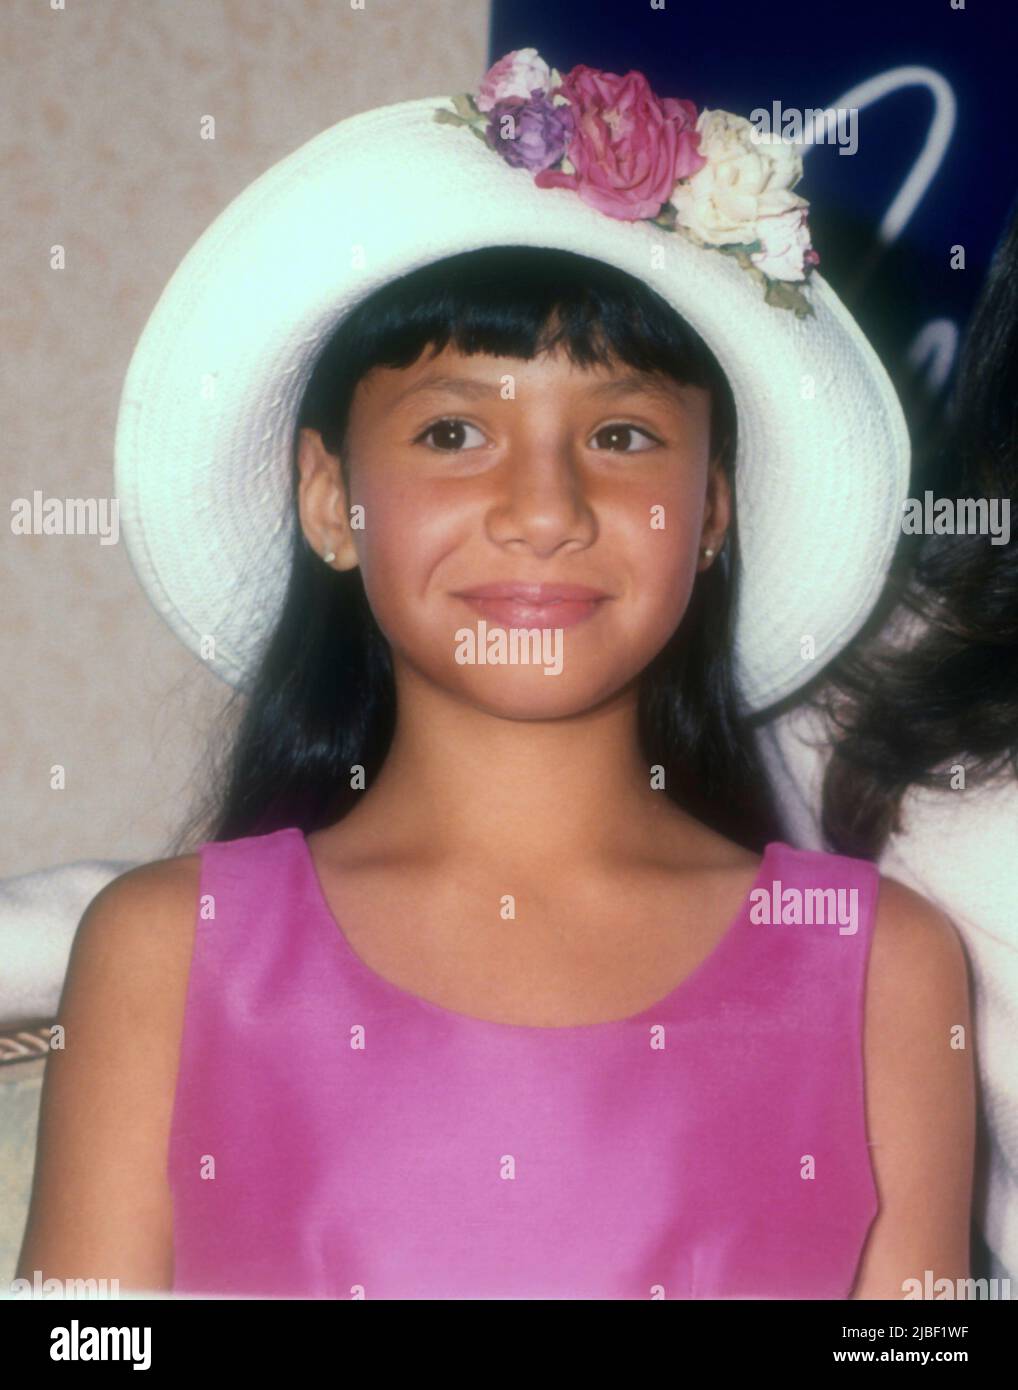 Beverly Hills, California, USA 18th June 1996 Actress Becky Lee Meza attends 'Selena' Press Conference on June 18, 1996 at The Four Seasons Hotel in Beverly Hills, California, USA. Photo by Barry King/Alamy Stock Photo Stock Photo